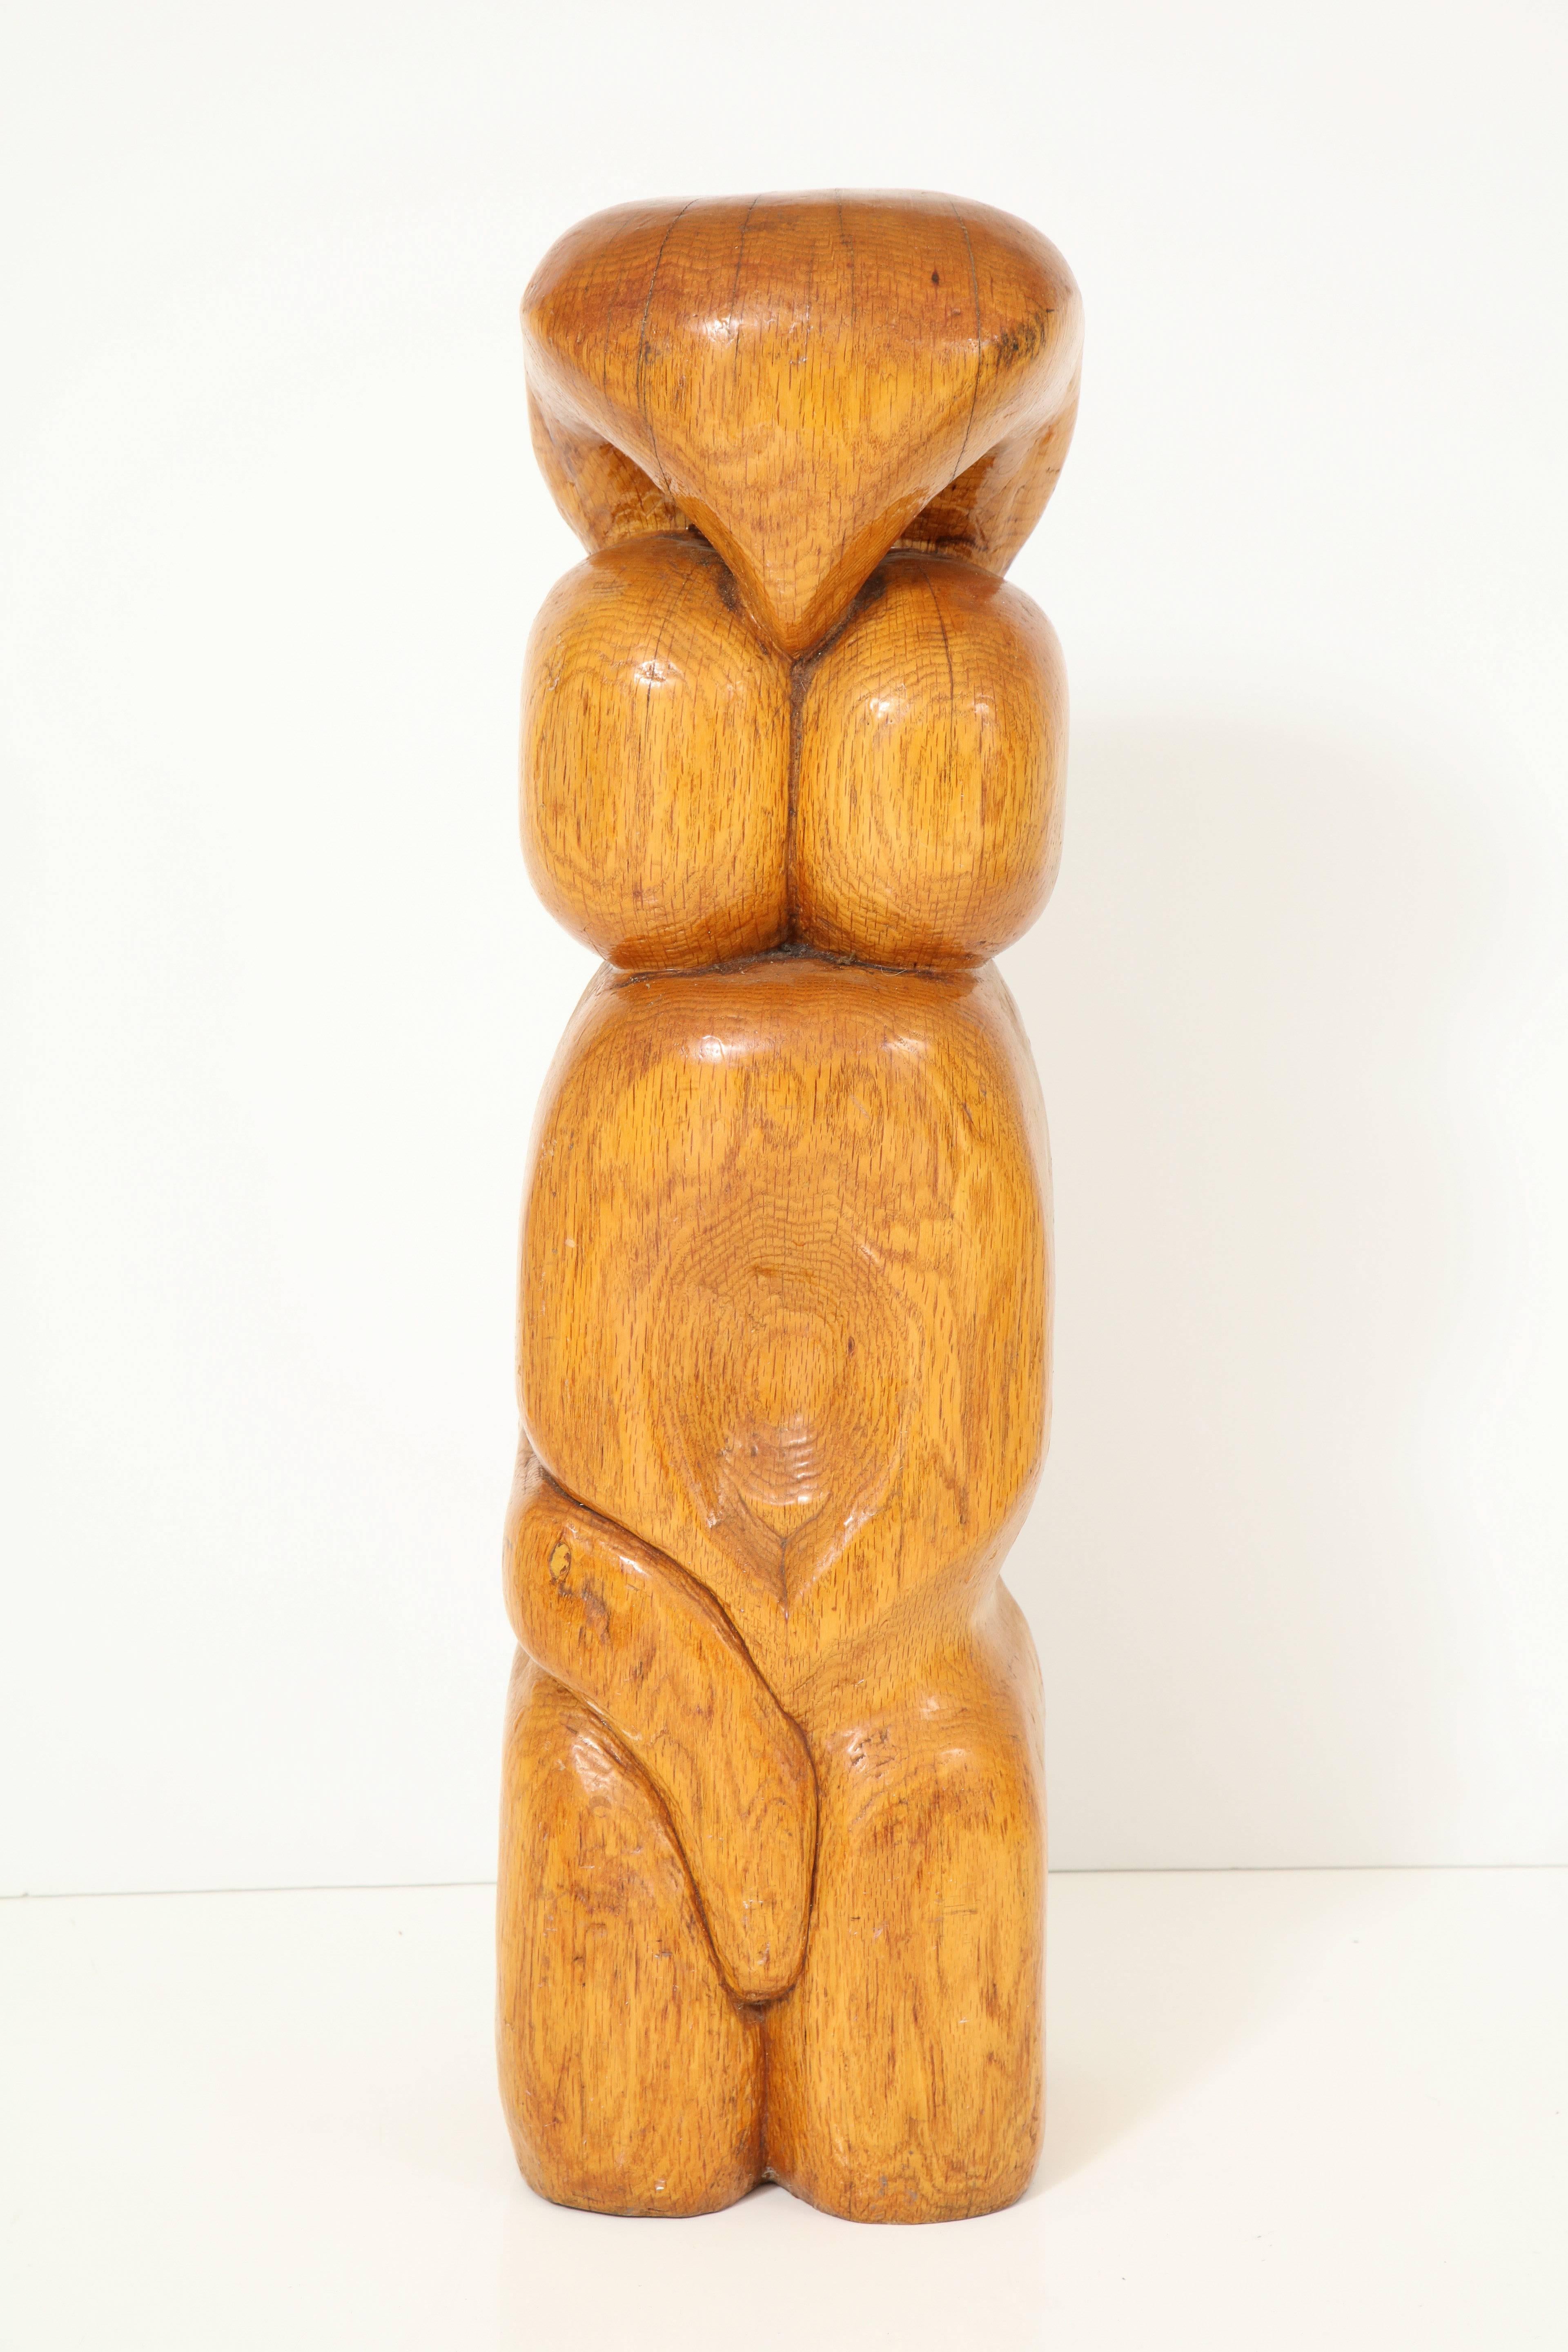 Midcentury wood carving, seems to represent a female figure. Oregon pine.